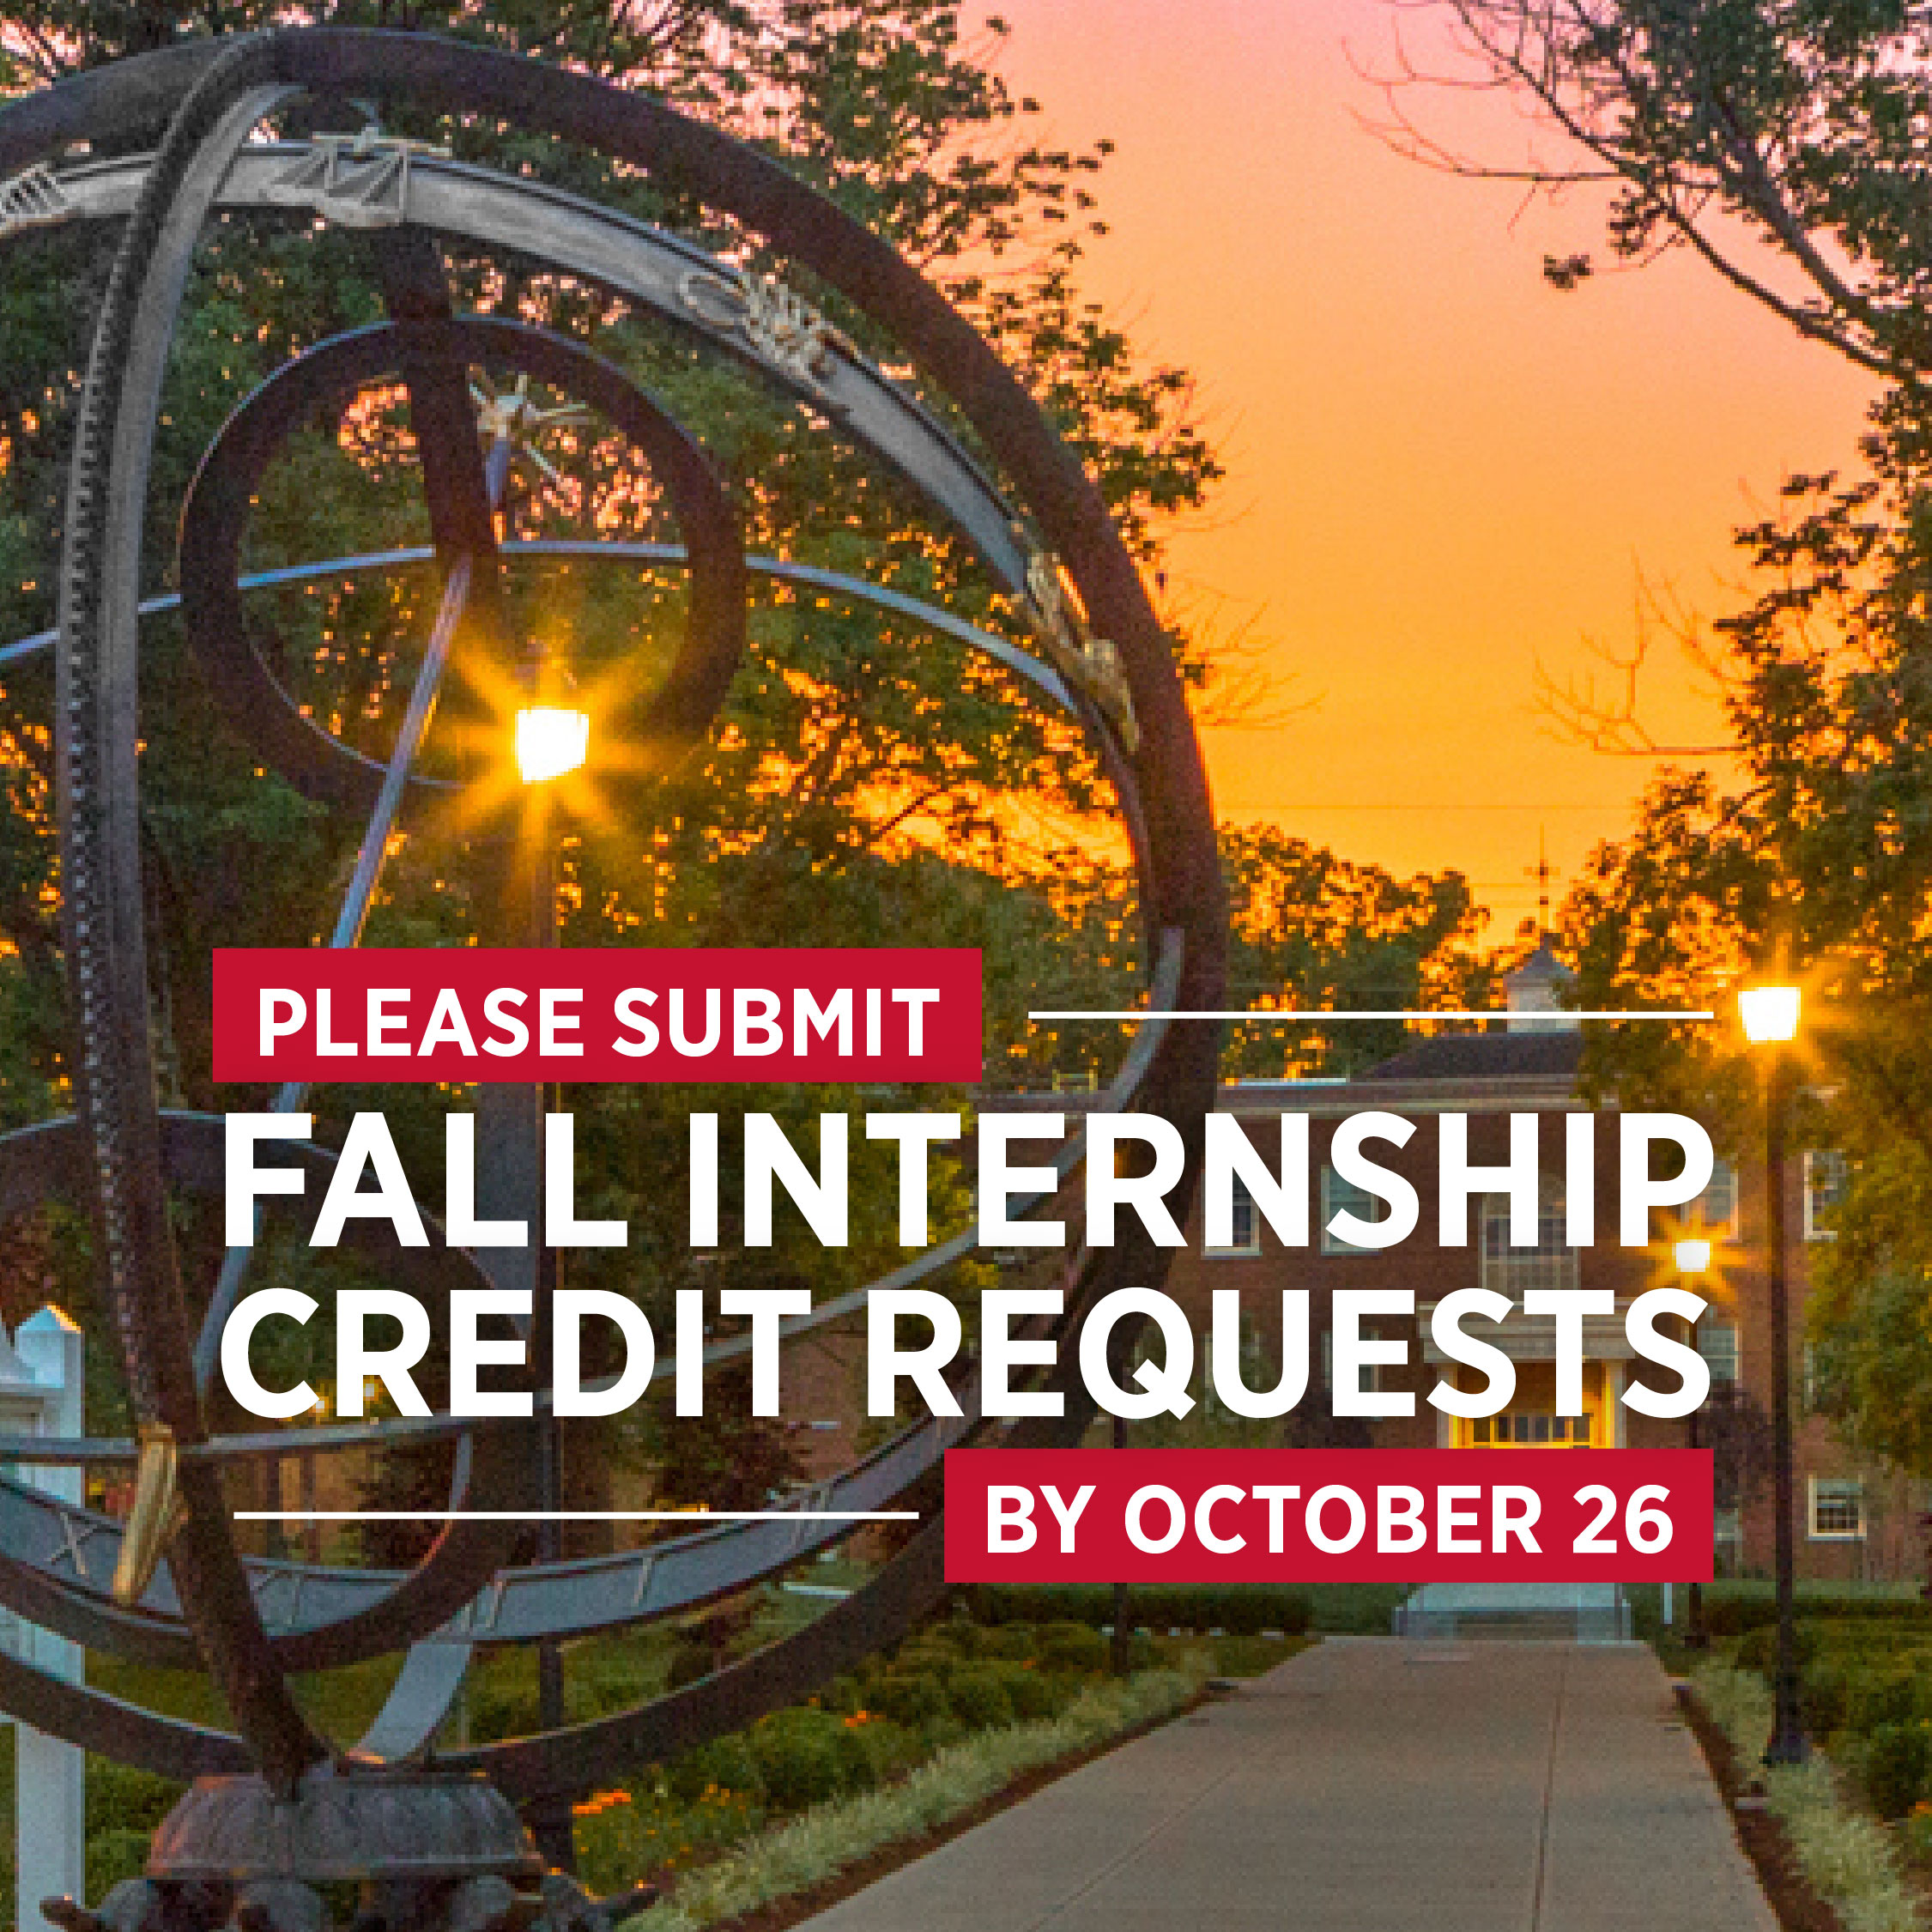  Please submit Fall Credit Internship Requests by October 26